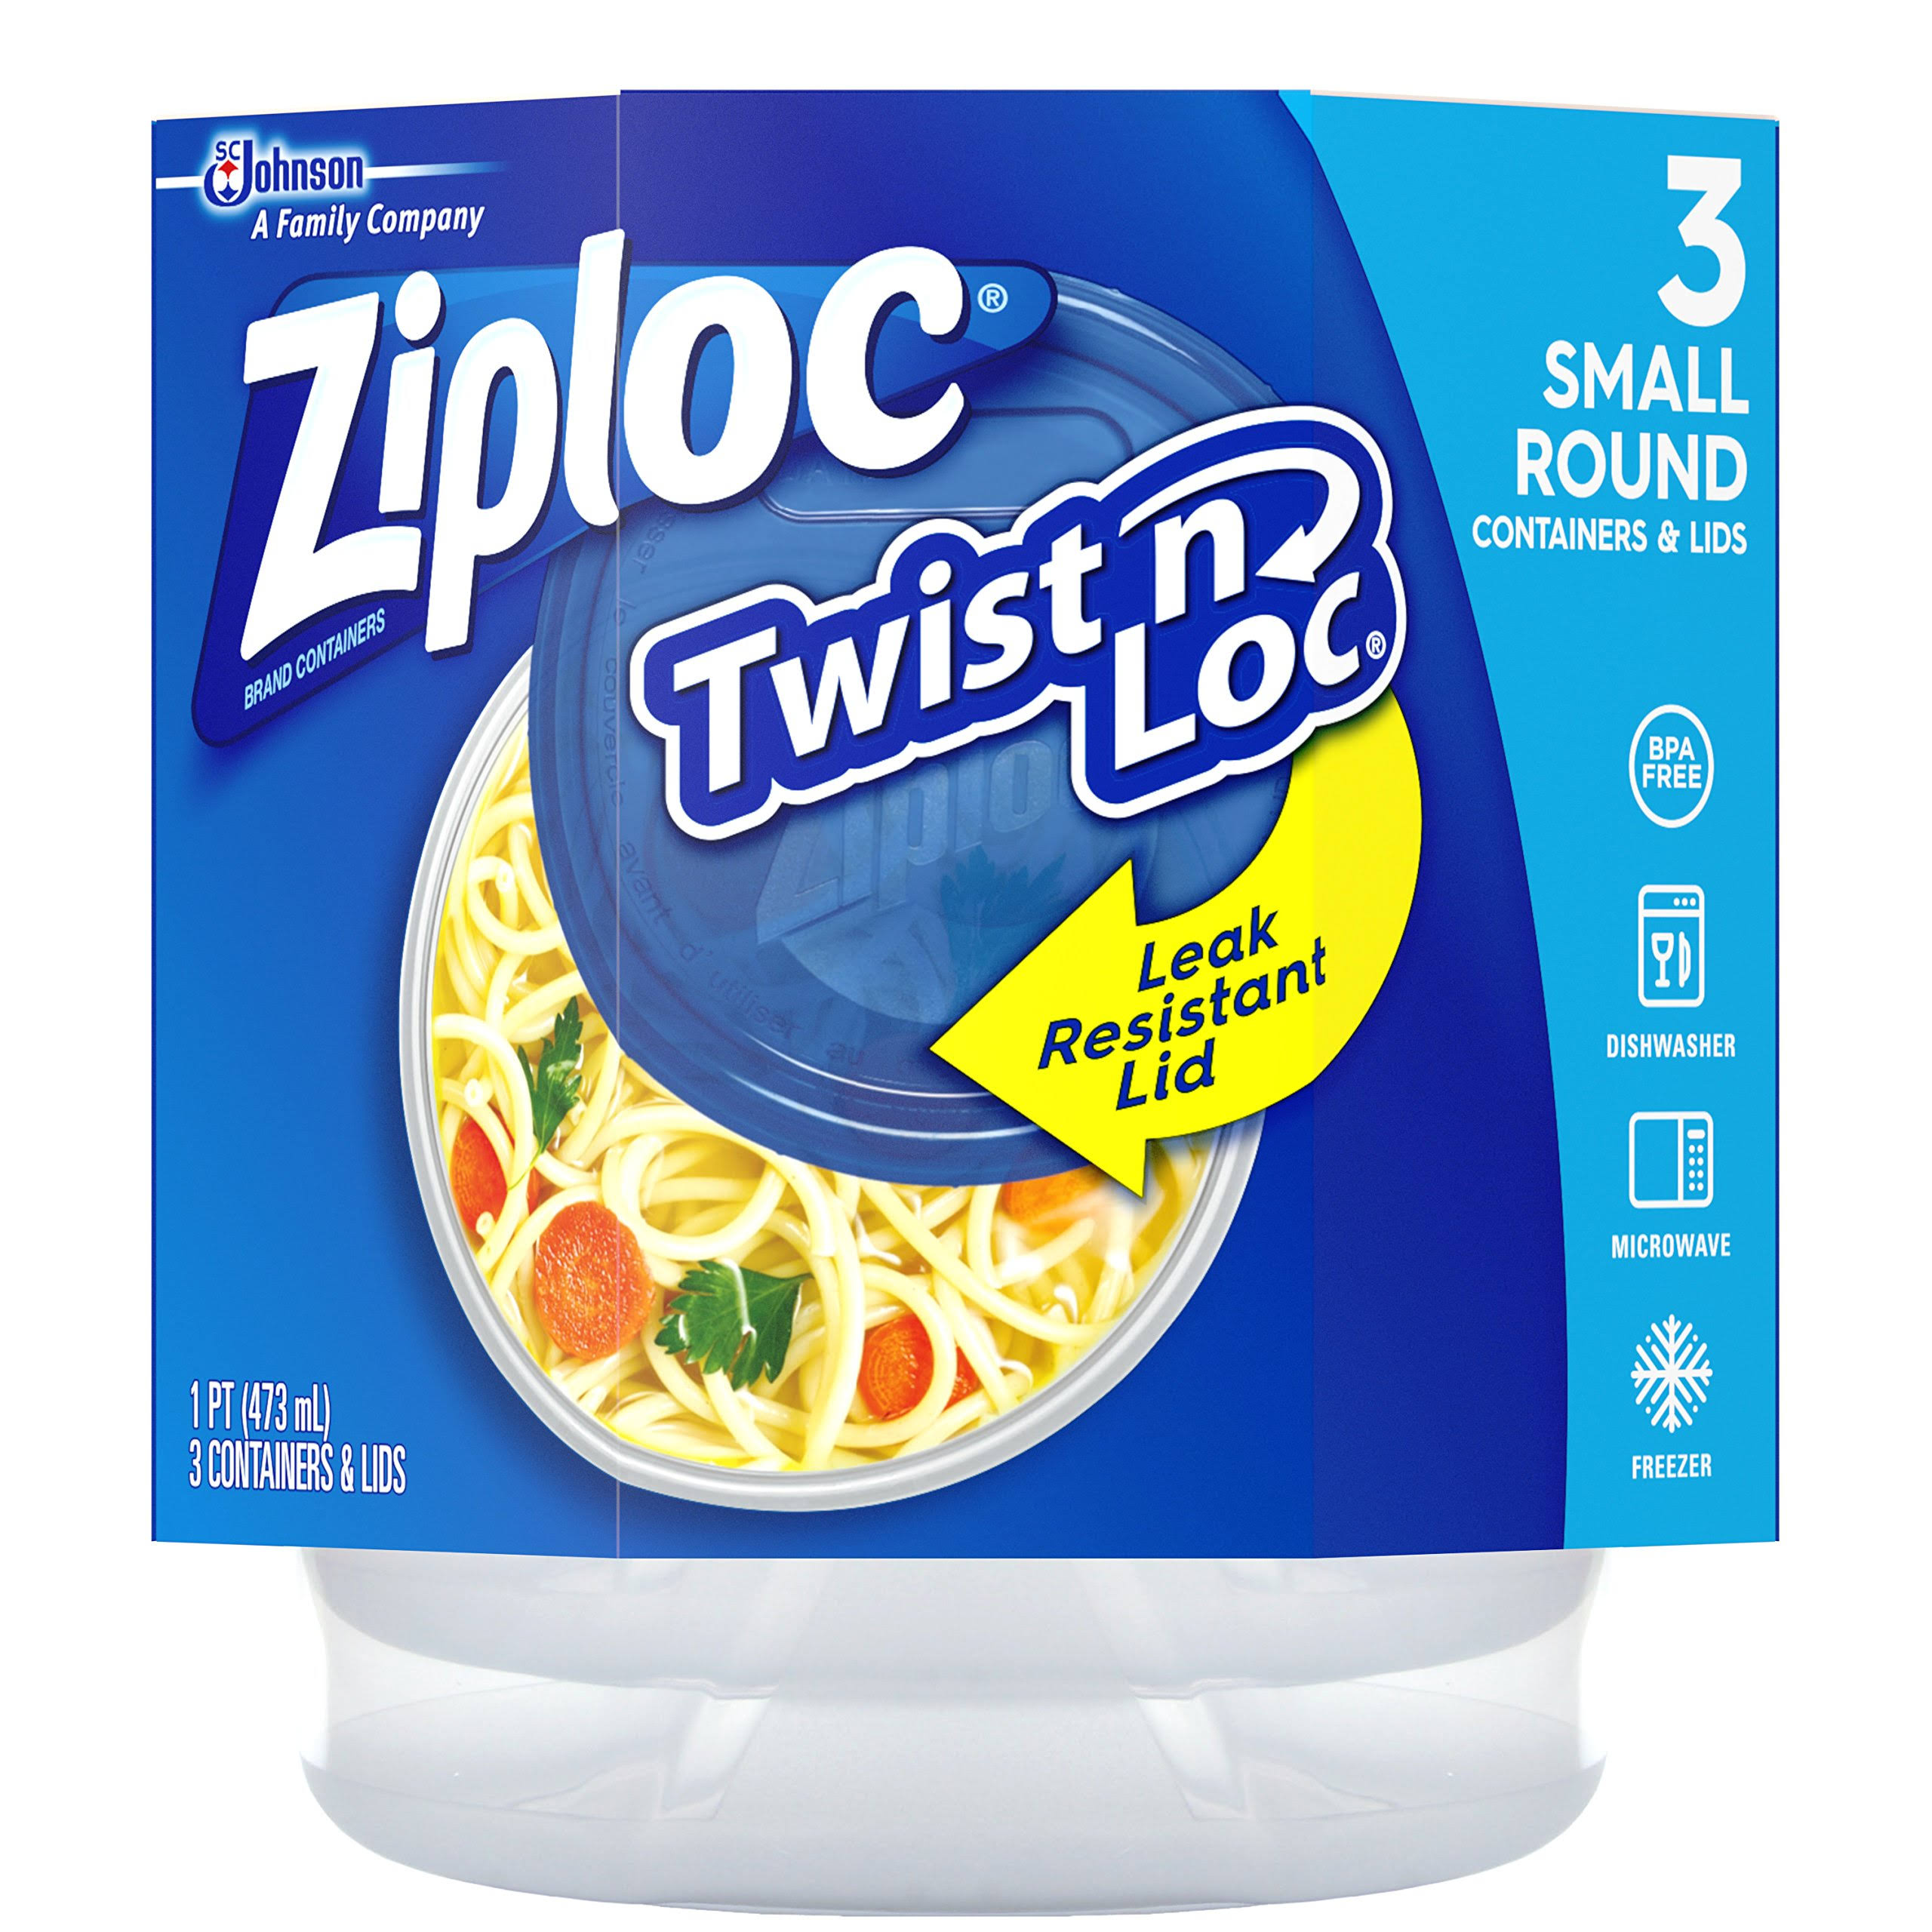 Ziploc Twist N Loc Small Round Containers & Lids - 3 Pack